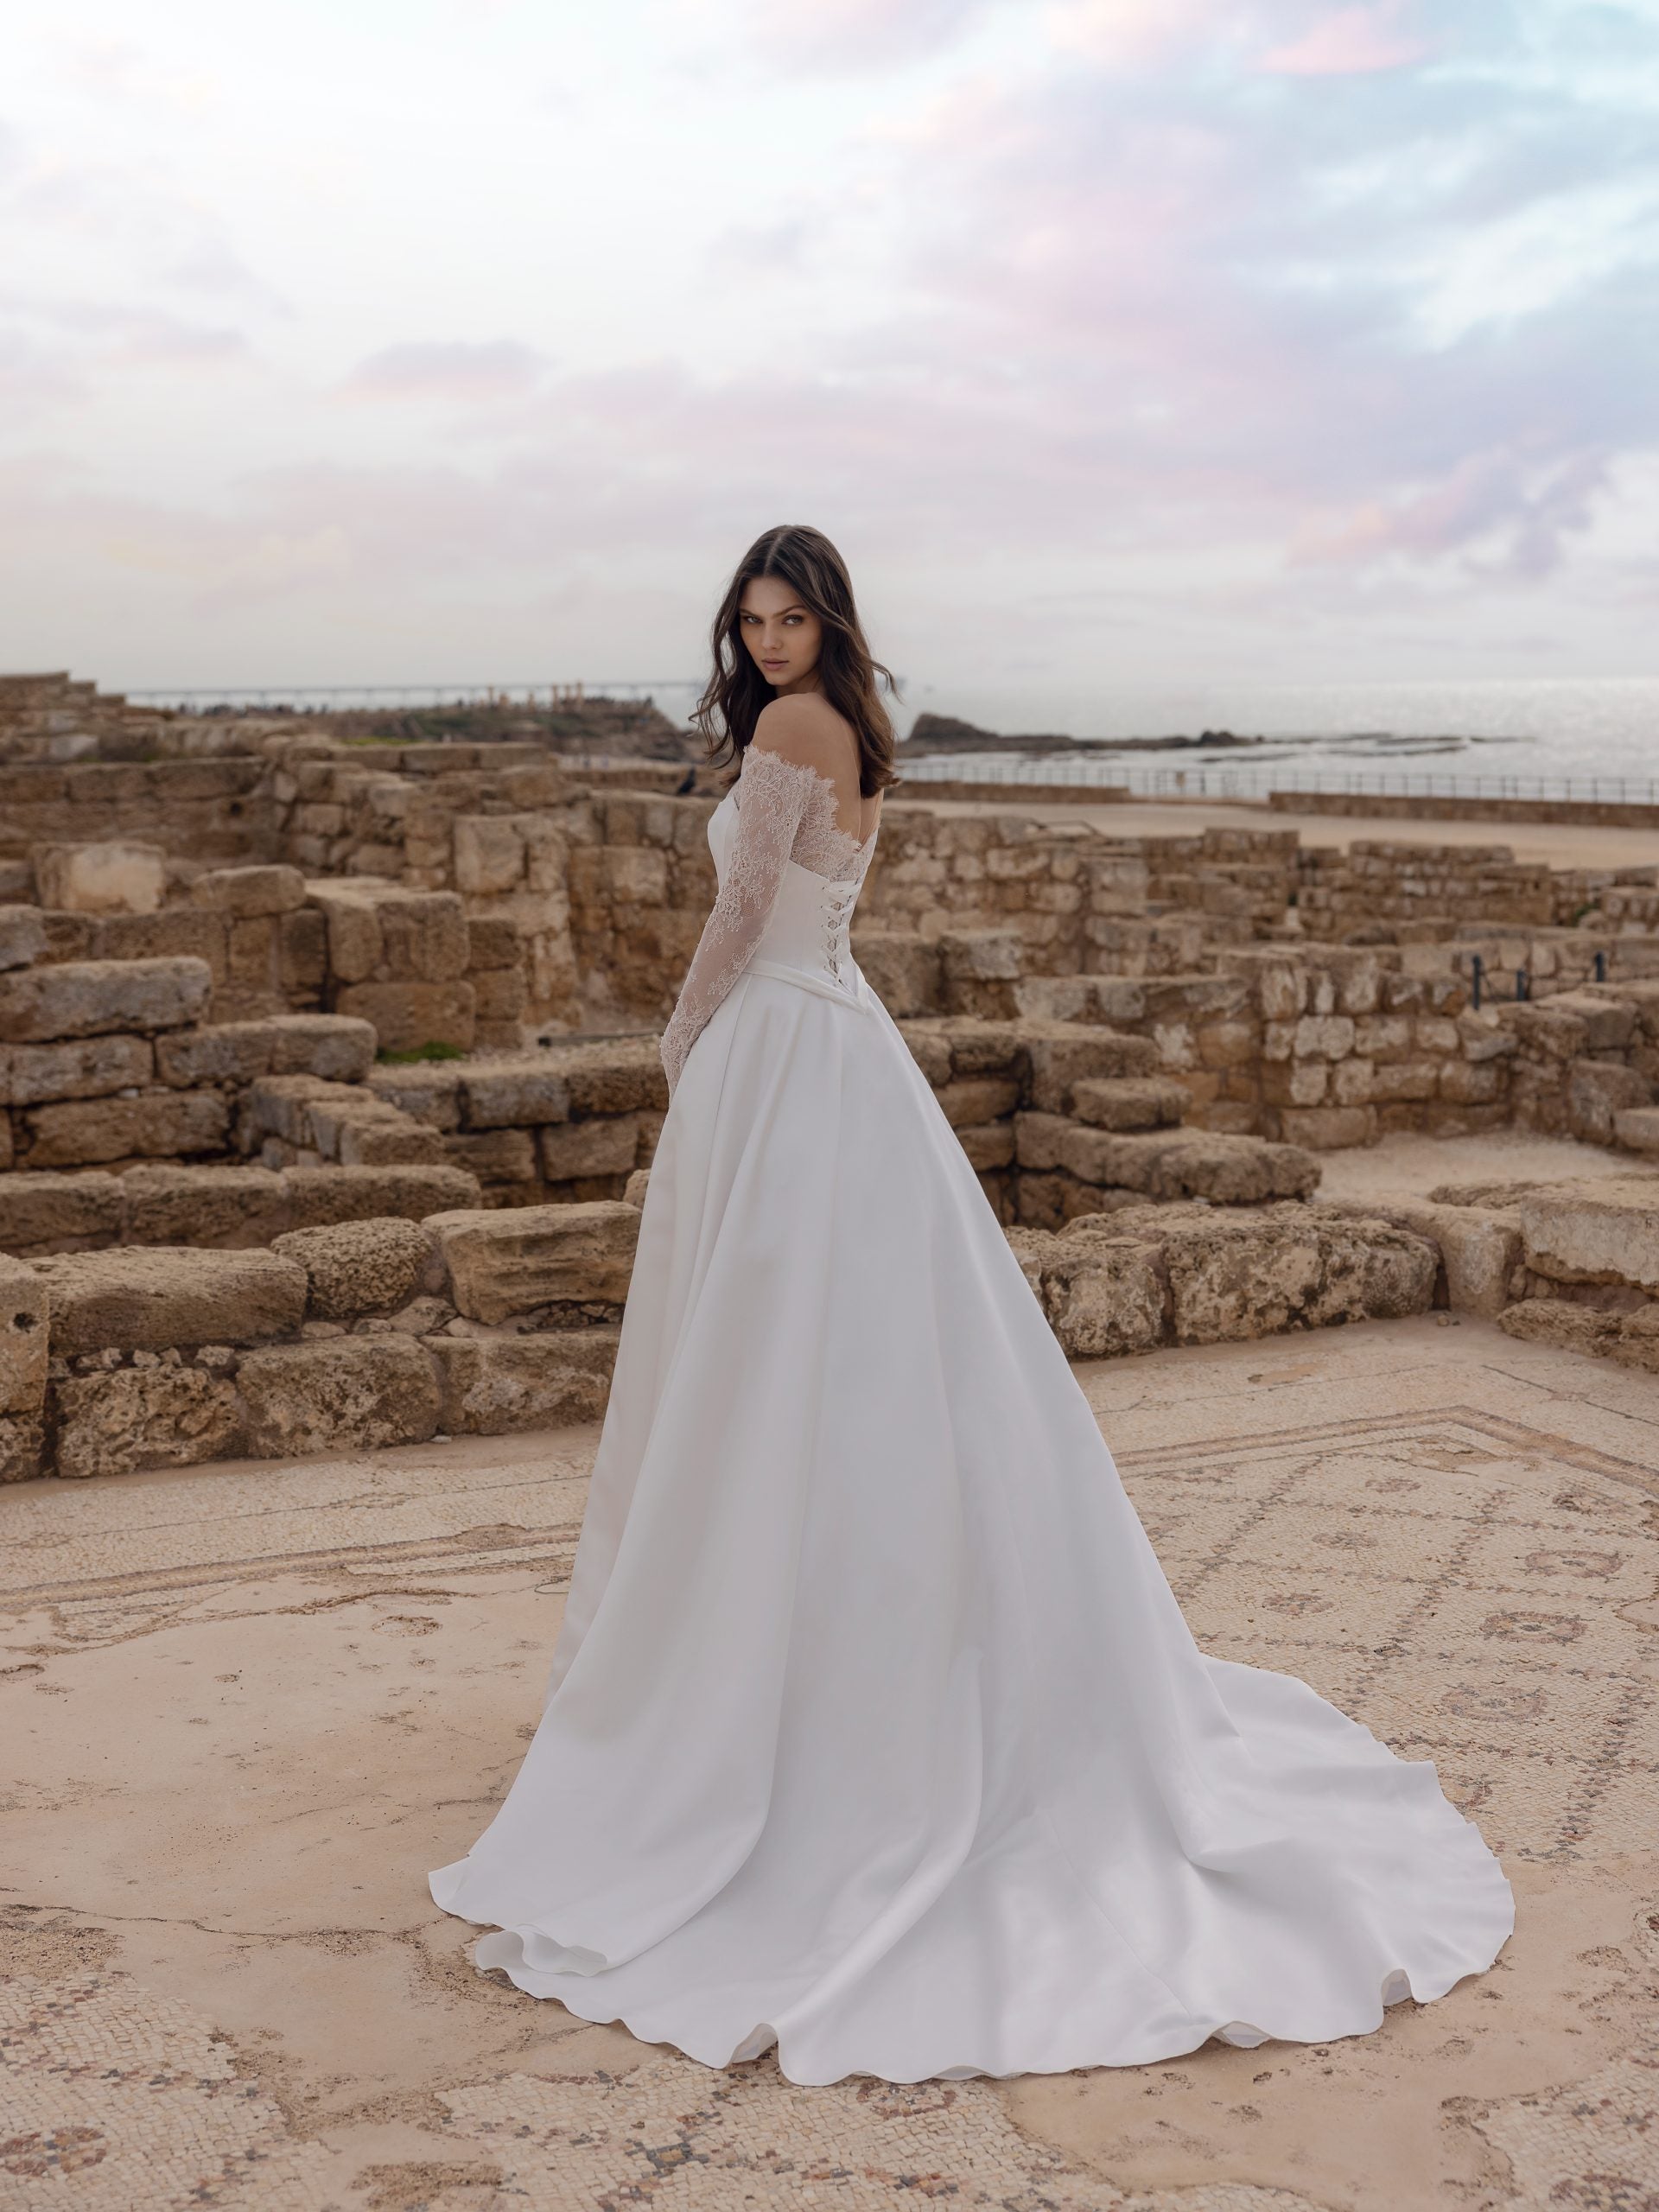 Strapless A-line Wedding Dress With Lace Underlayer by Love by Pnina Tornai - Image 2